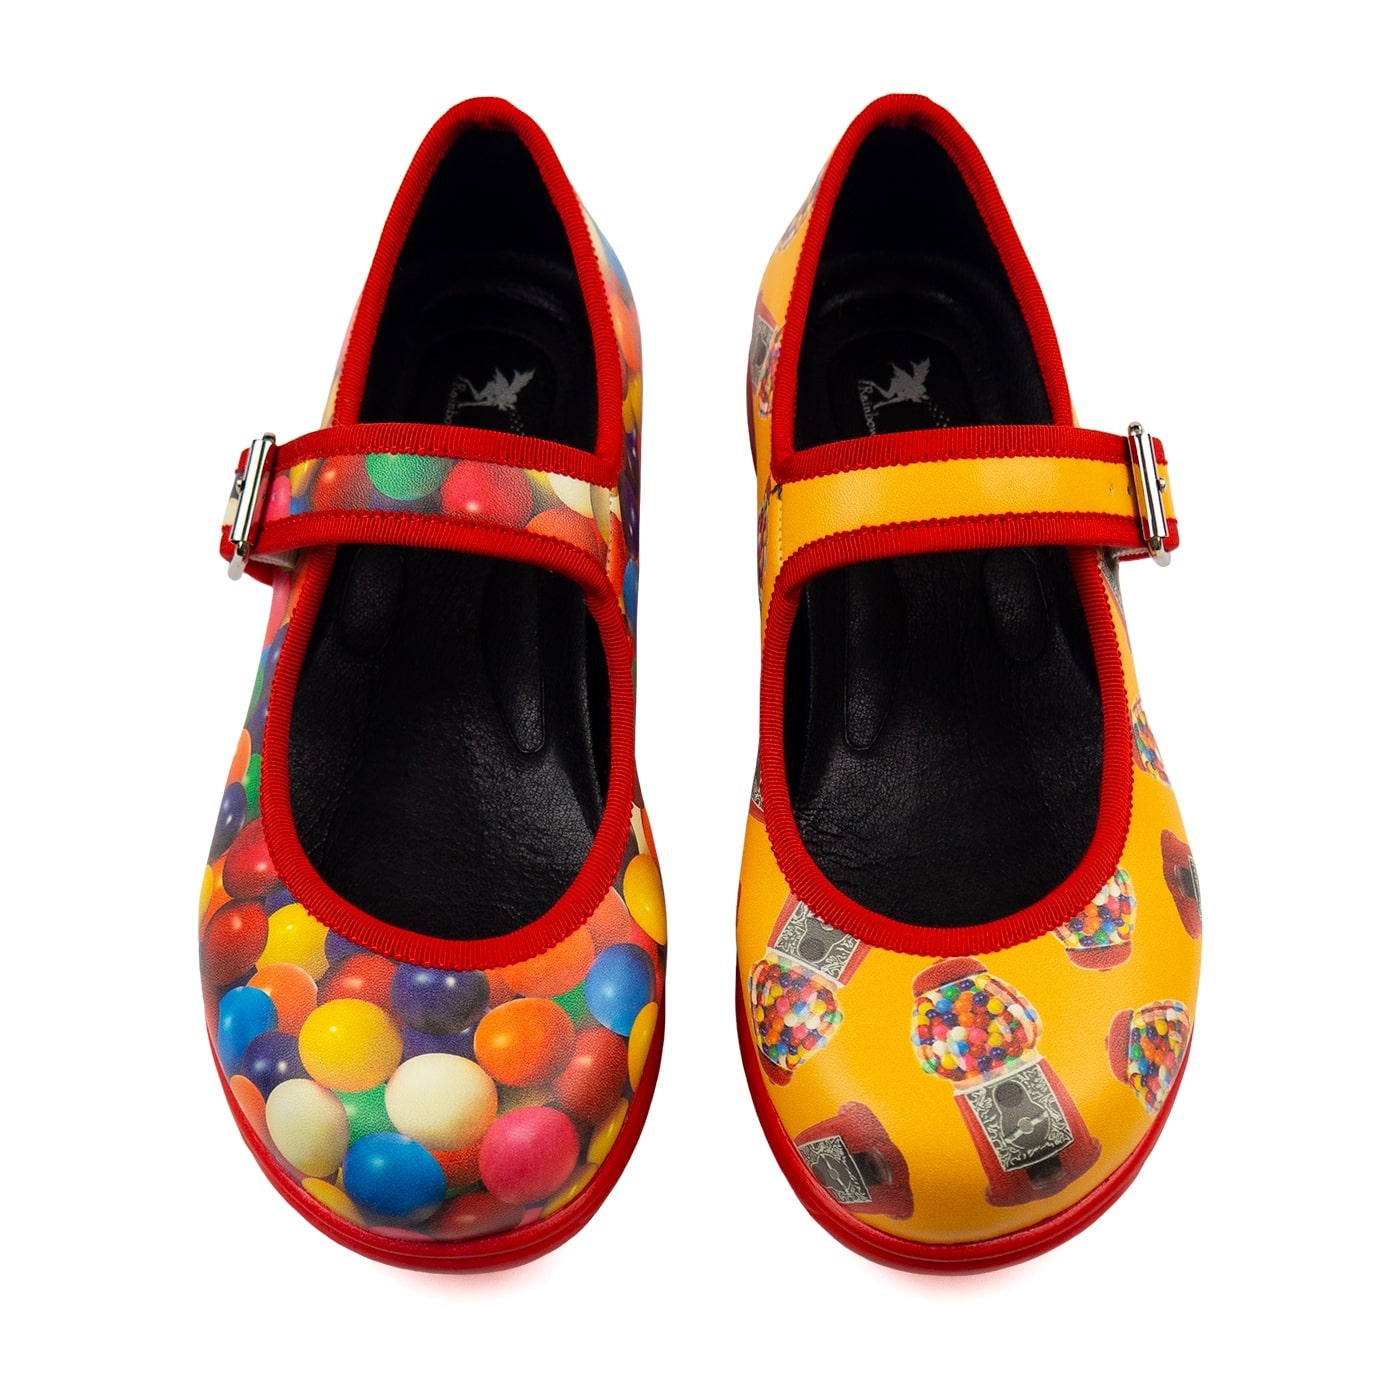 Gumball Mary Janes by RainbowsAndFairies.com.au (Gumball - Bubblegum - Mismatched Shoes - Rock & Roll - Vintage - Buckle Up Shoes - Kitsch Shoes) - SKU: FW_MARYJ_GBALL_ORG - Pic-02